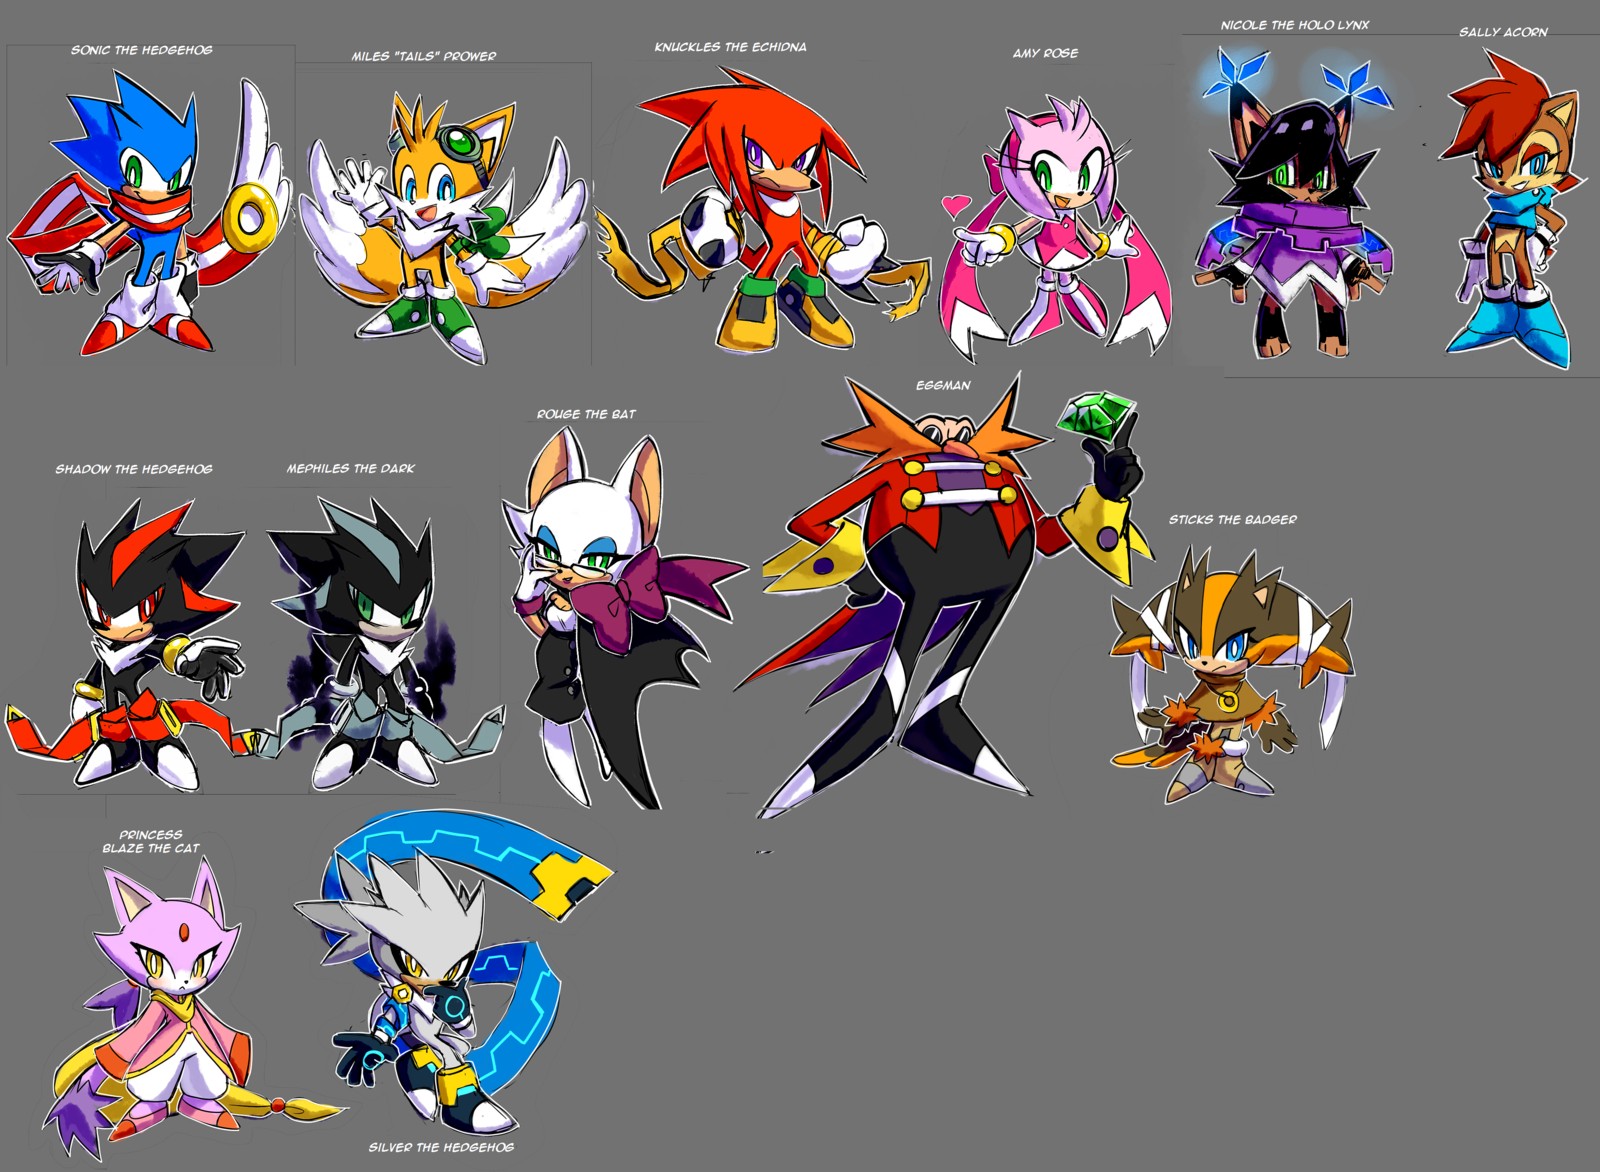 Tails (character), Sonic, Sonic the Hedgehog, Sonic Boom, Shadow the